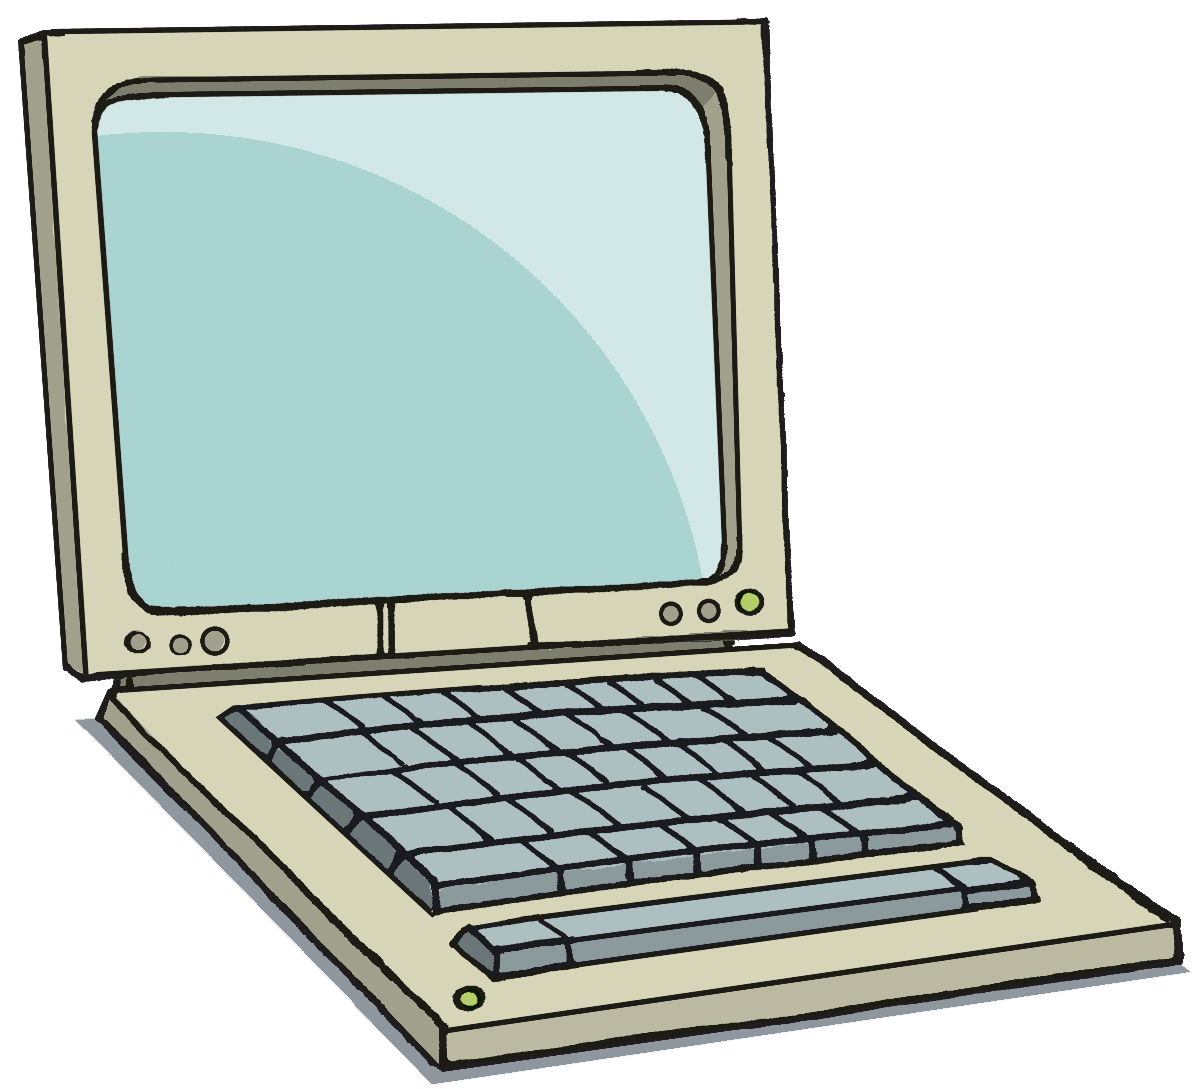 clipart of laptop - photo #14